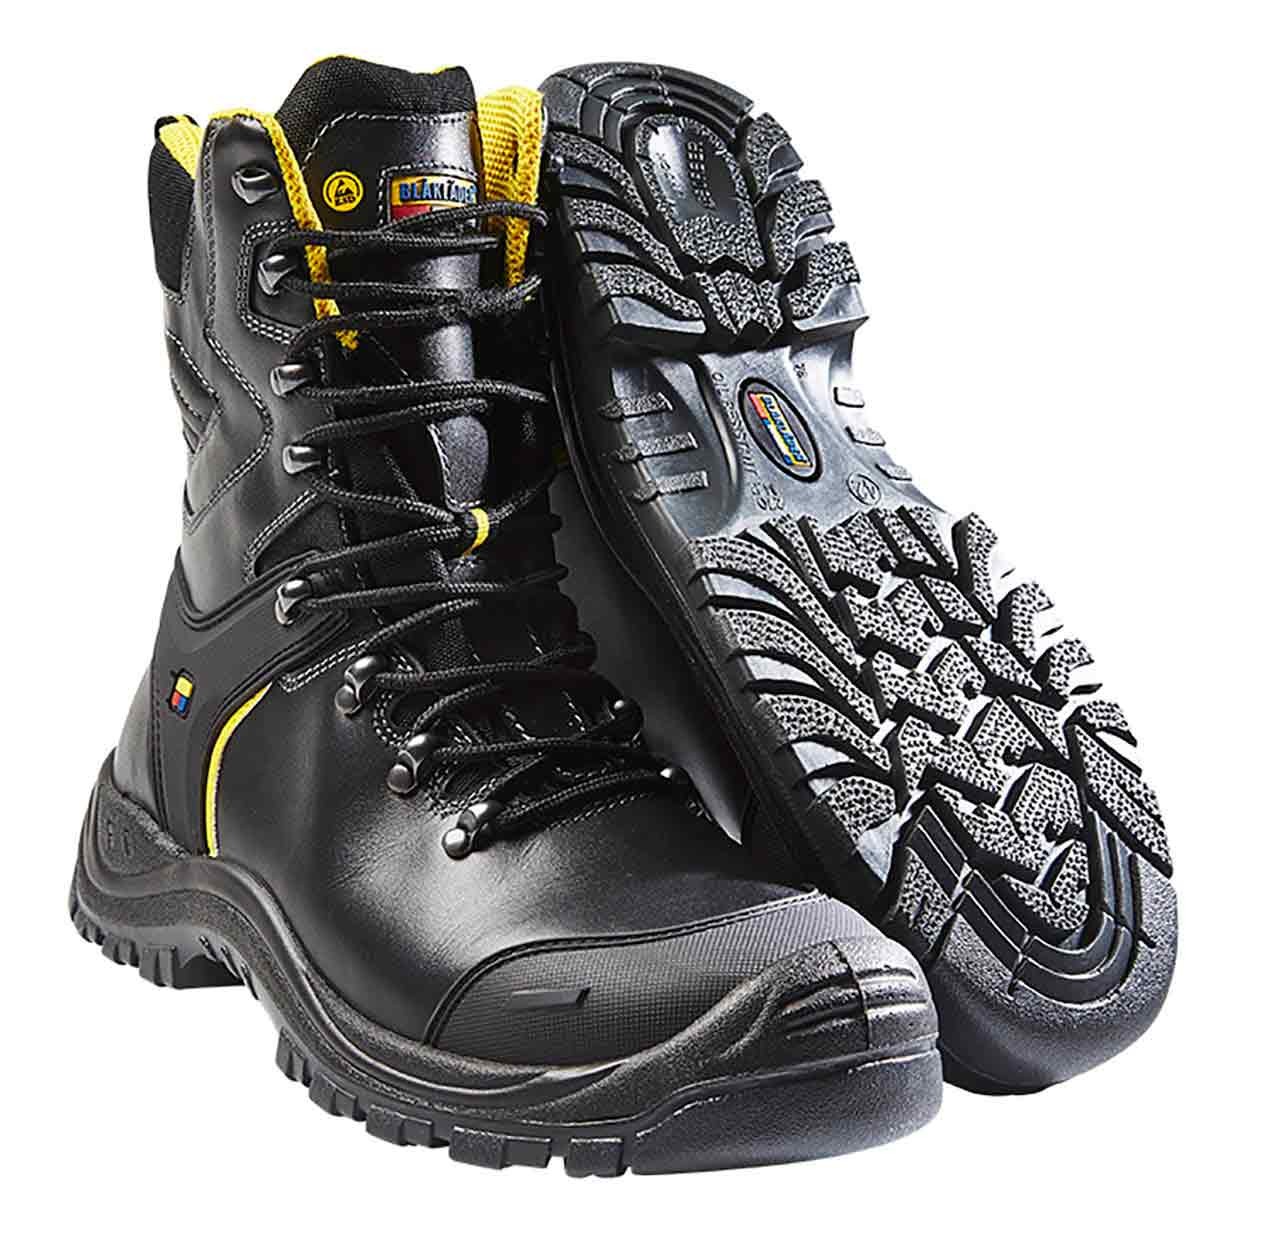 Blaklader 2319 Winter Boot S3 - Standard Safety Boots - Mens Safety Boots &  Shoes - Safety Footwear - Best Workwear